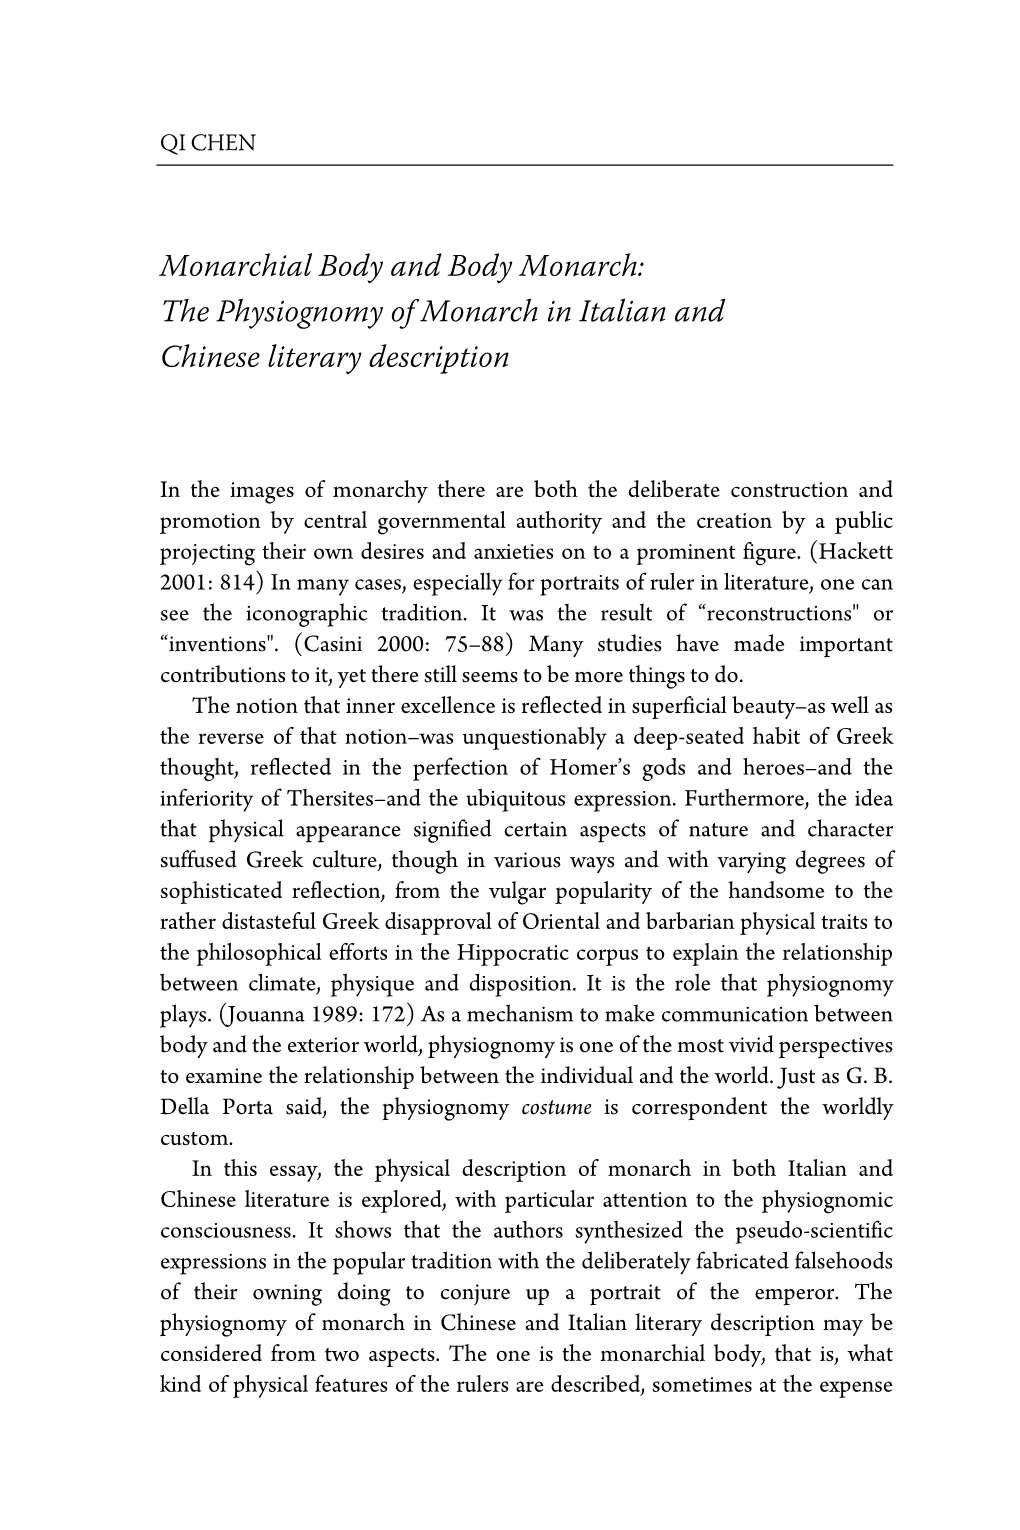 The Physiognomy of Monarch in Italian and Chinese Literary Description